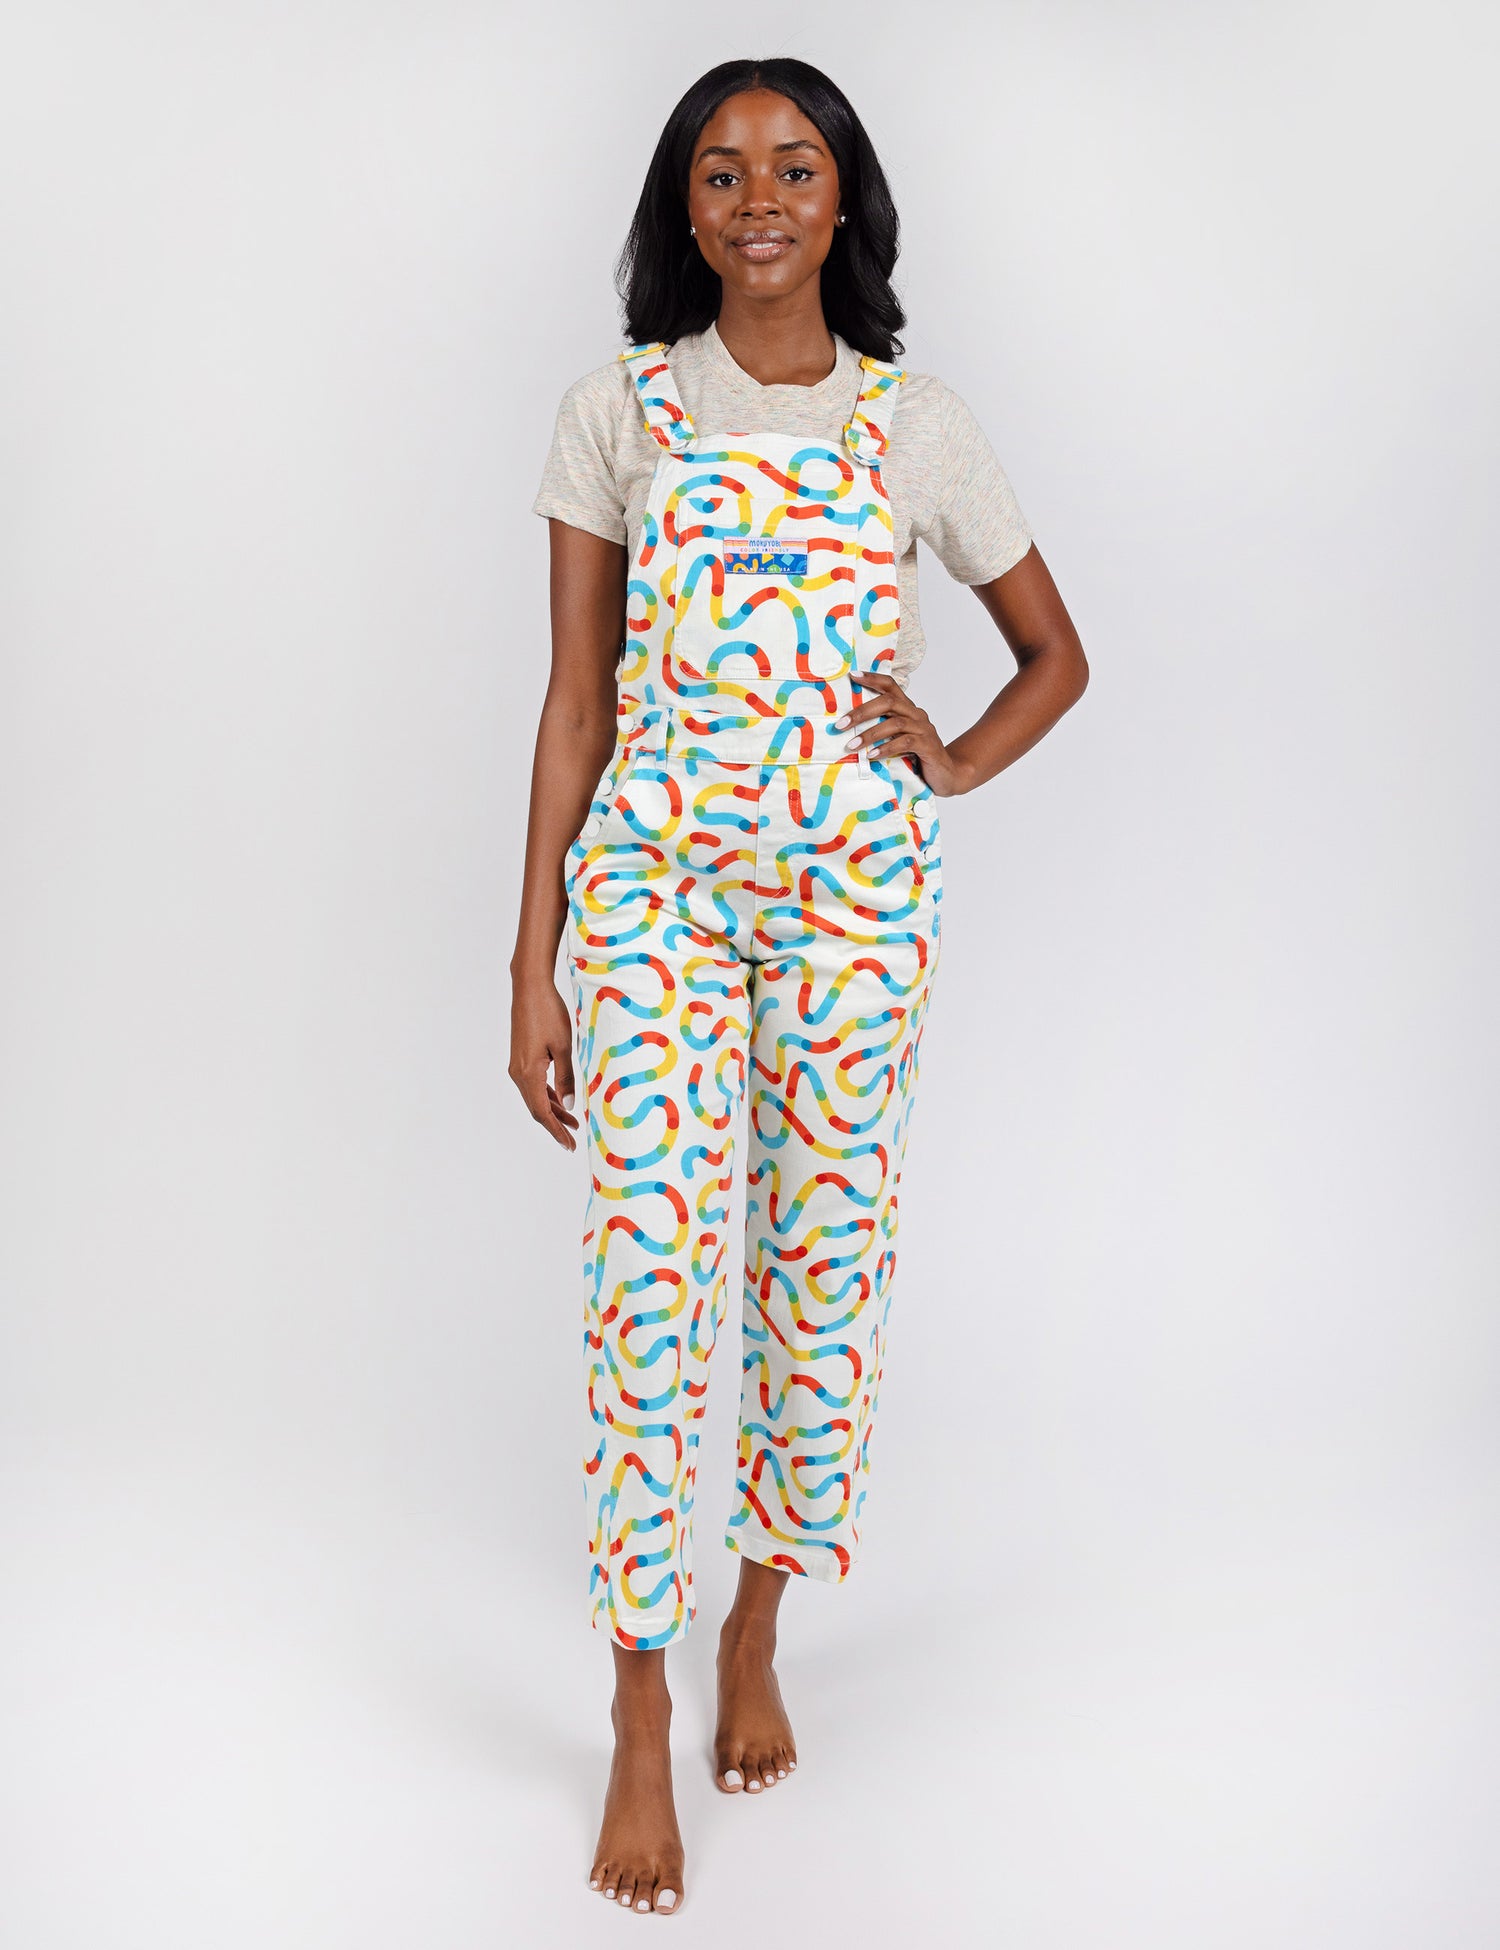 woman wearing white pants overalls with colorful squiggle designs.